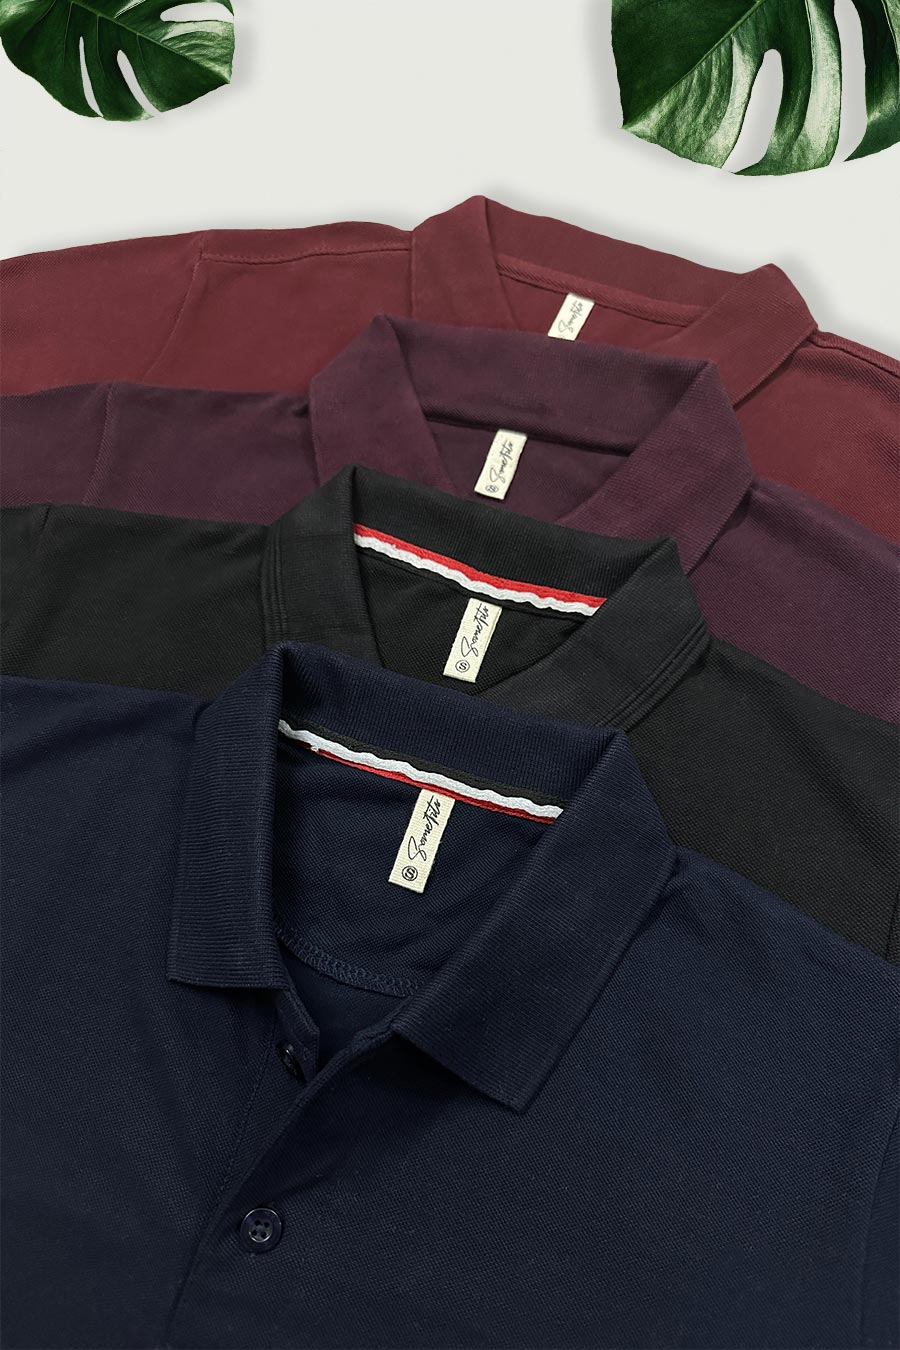 Pack 4 - Maroon, Wine, Black & Navy - Classic Polo